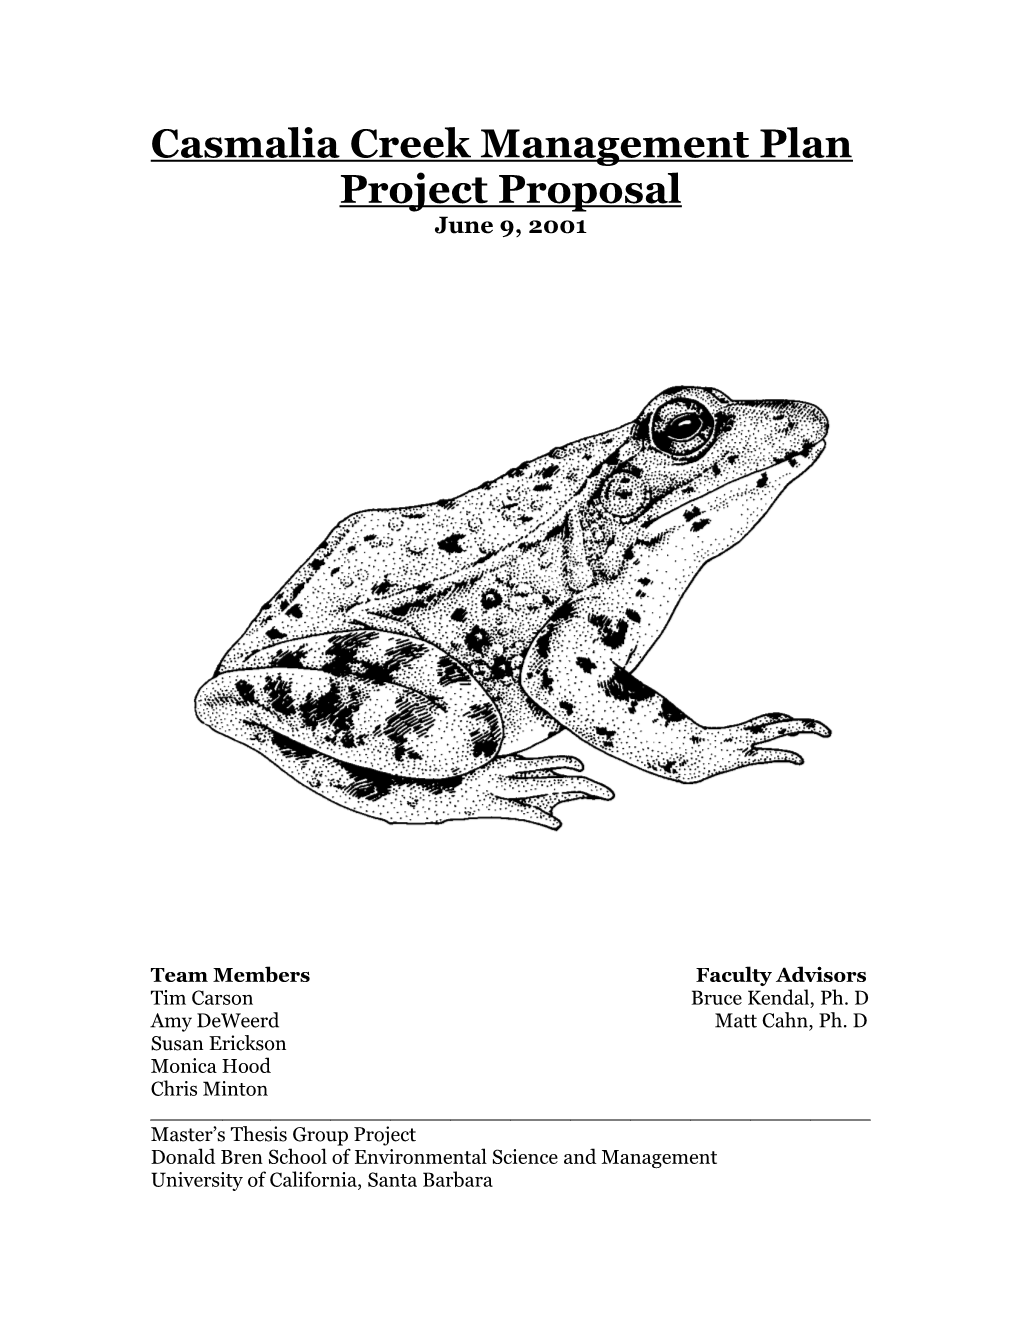 Draft Project Proposal